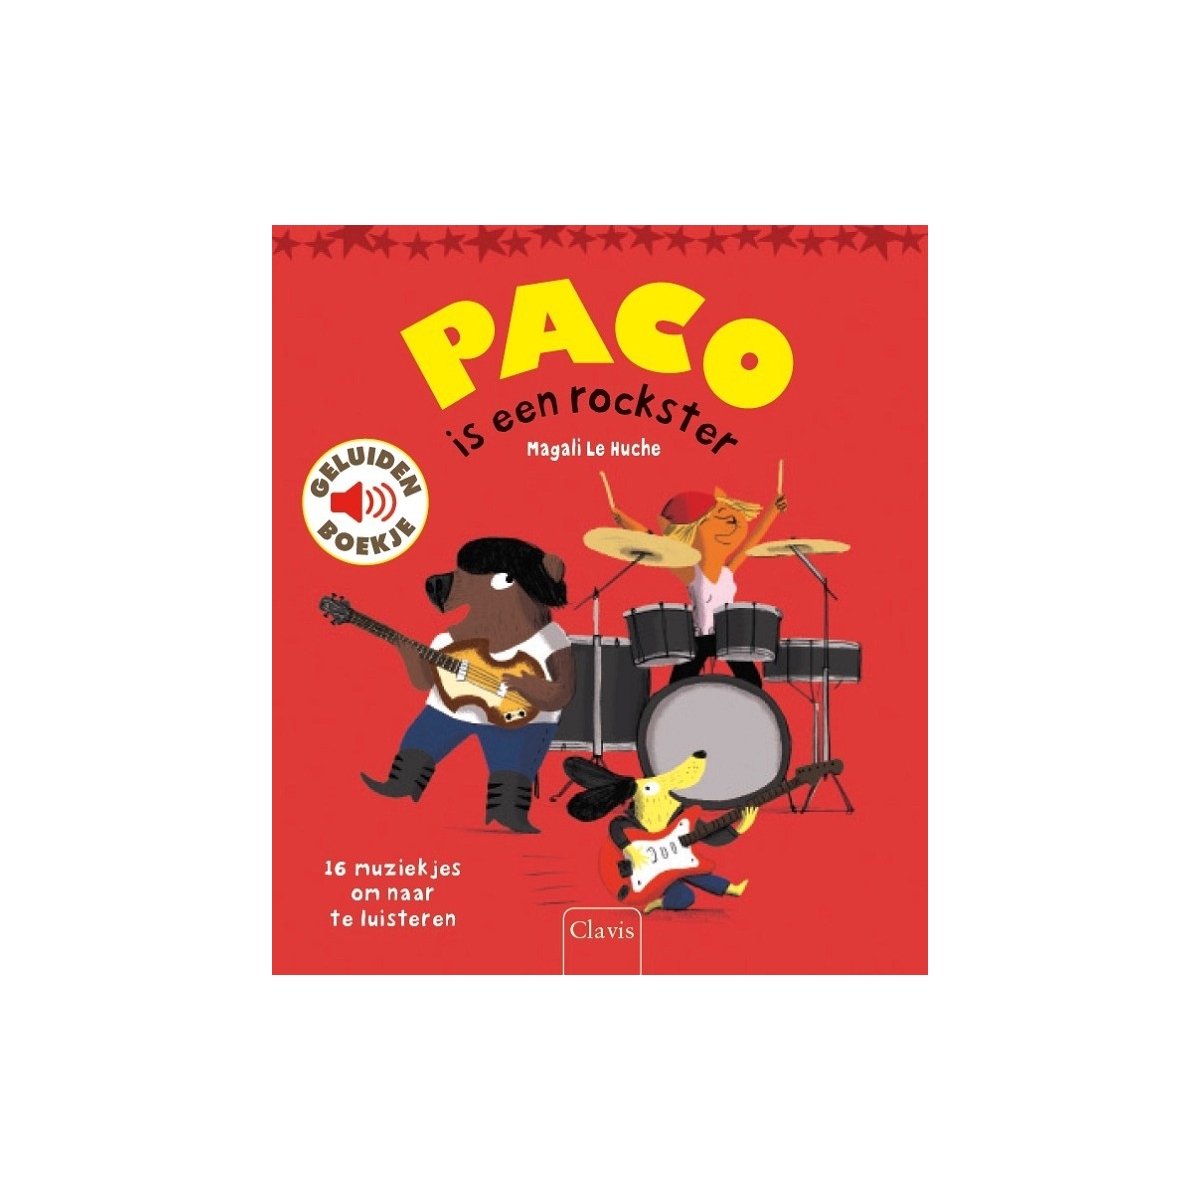 Paco - Paco is een rockster - Magali le Huche